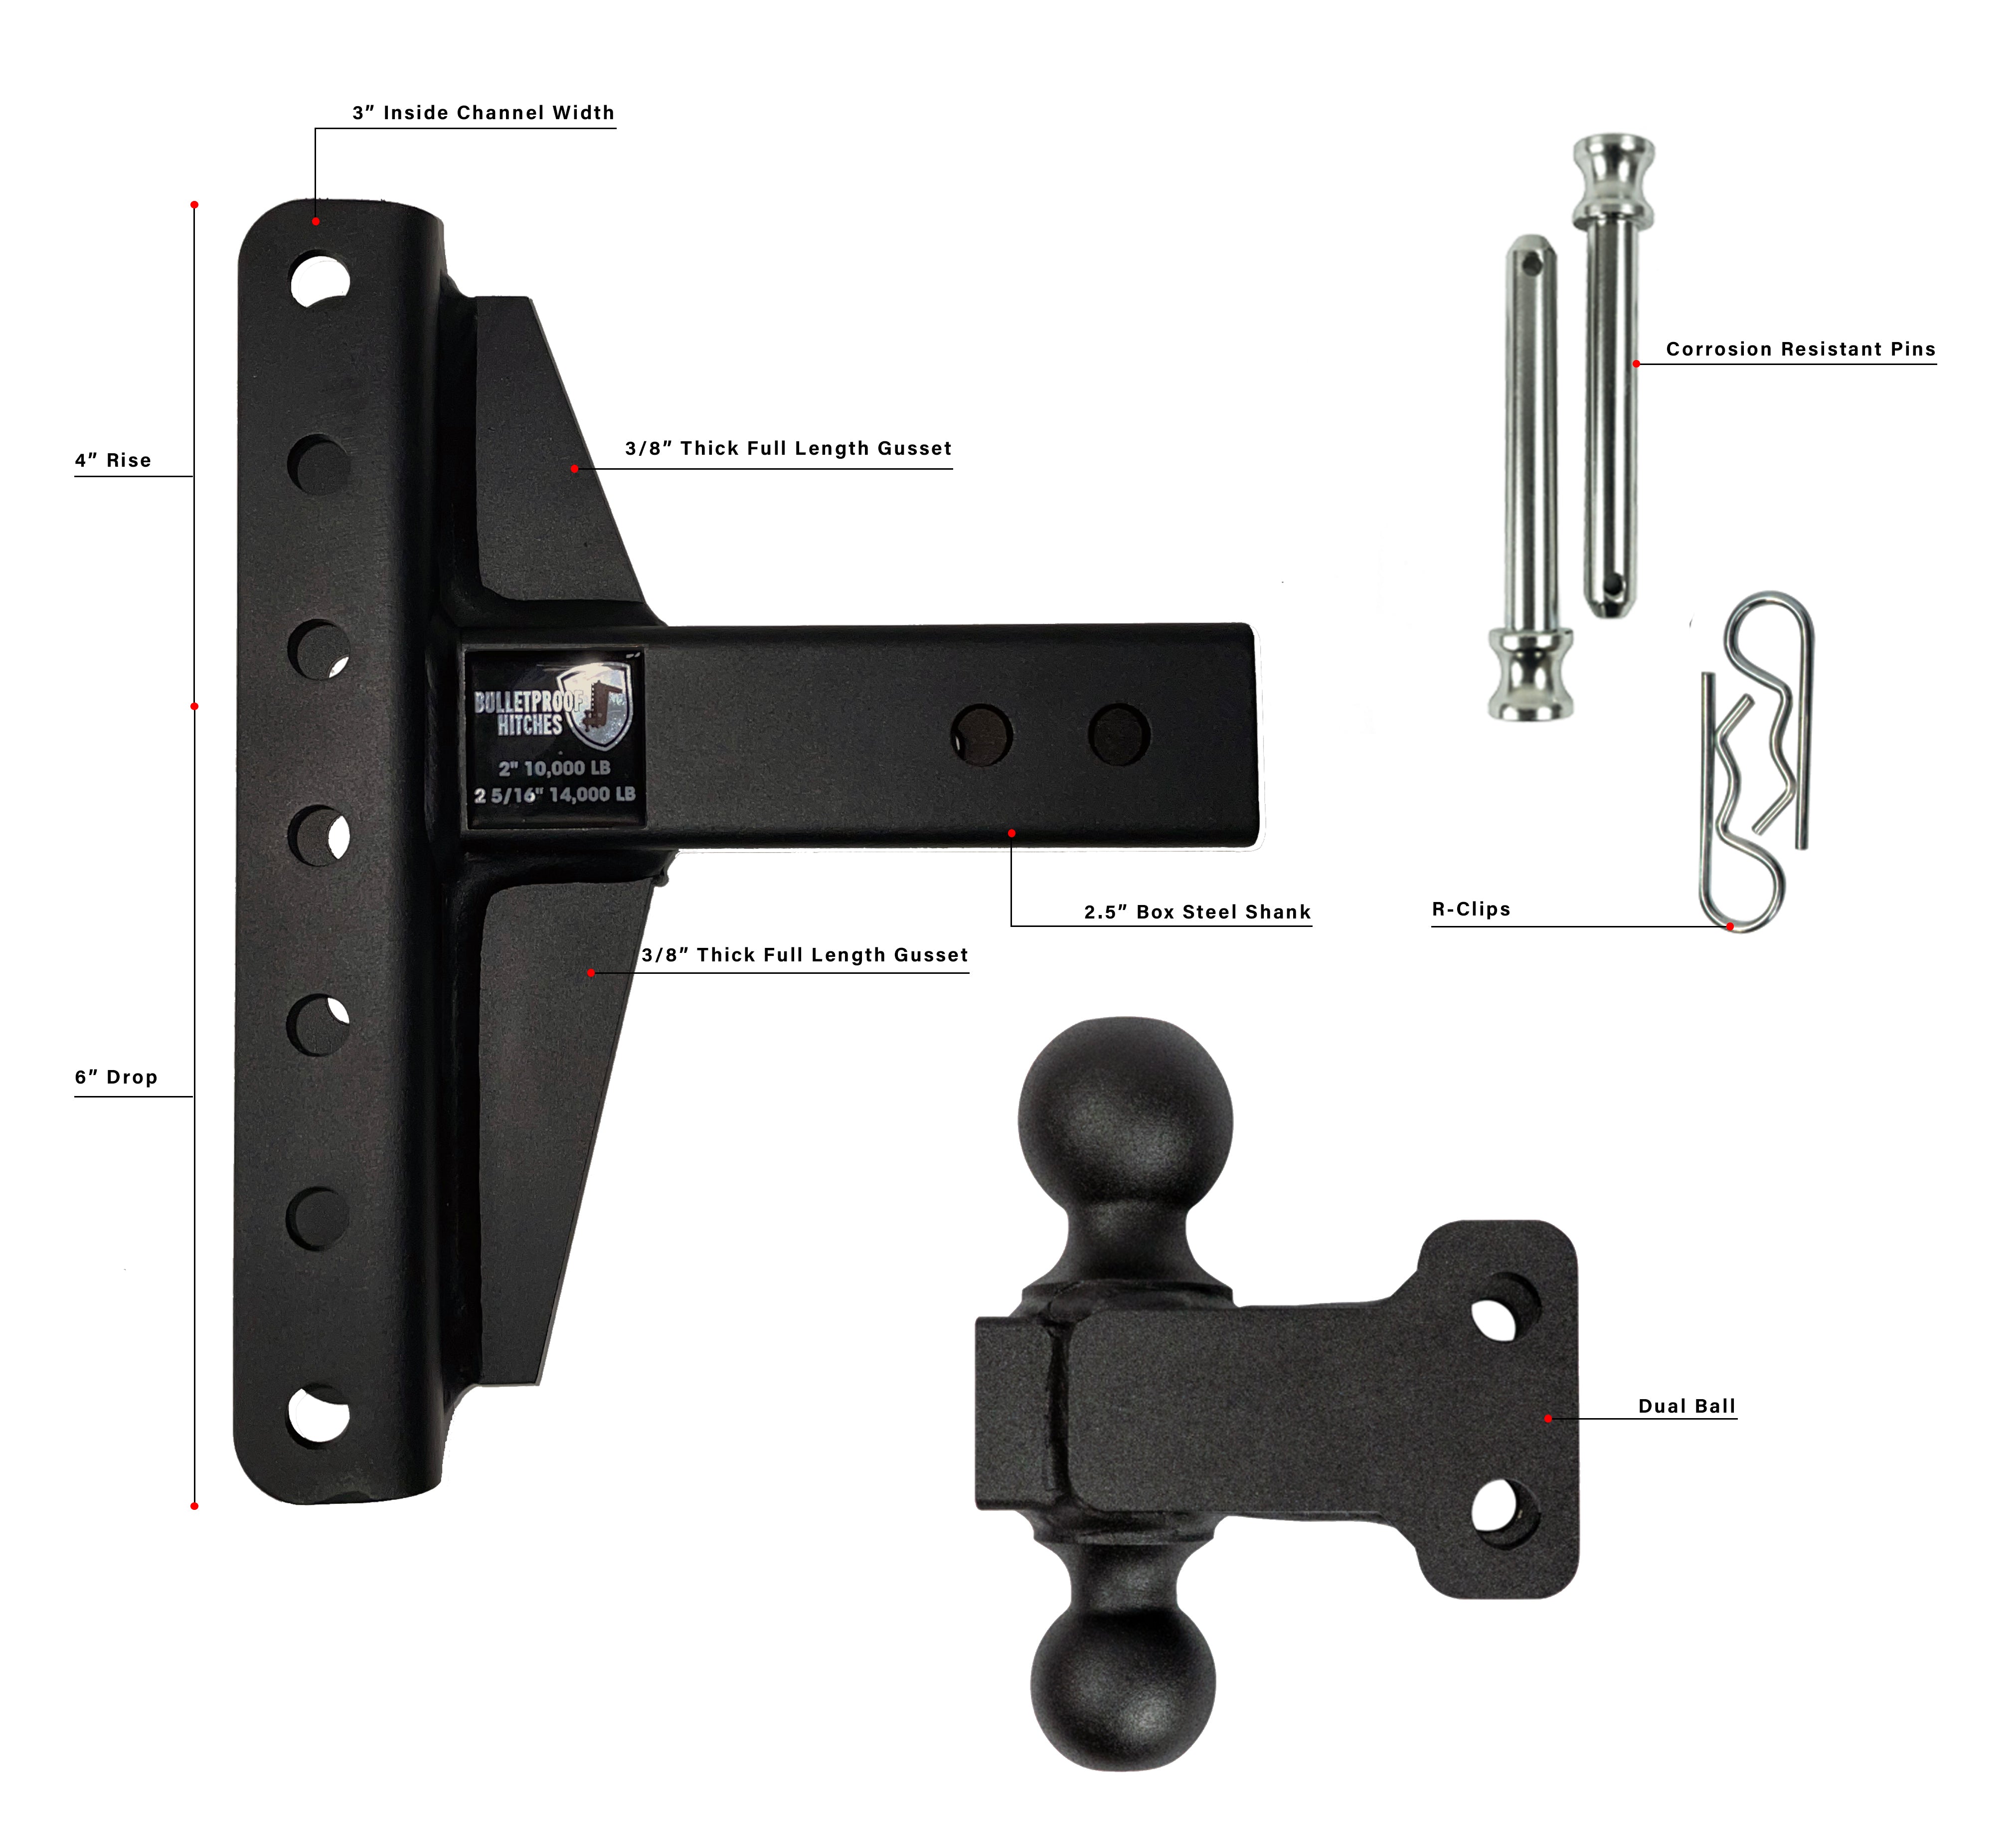 2.5" Medium Duty 4" & 6" Offset Hitch Included Parts